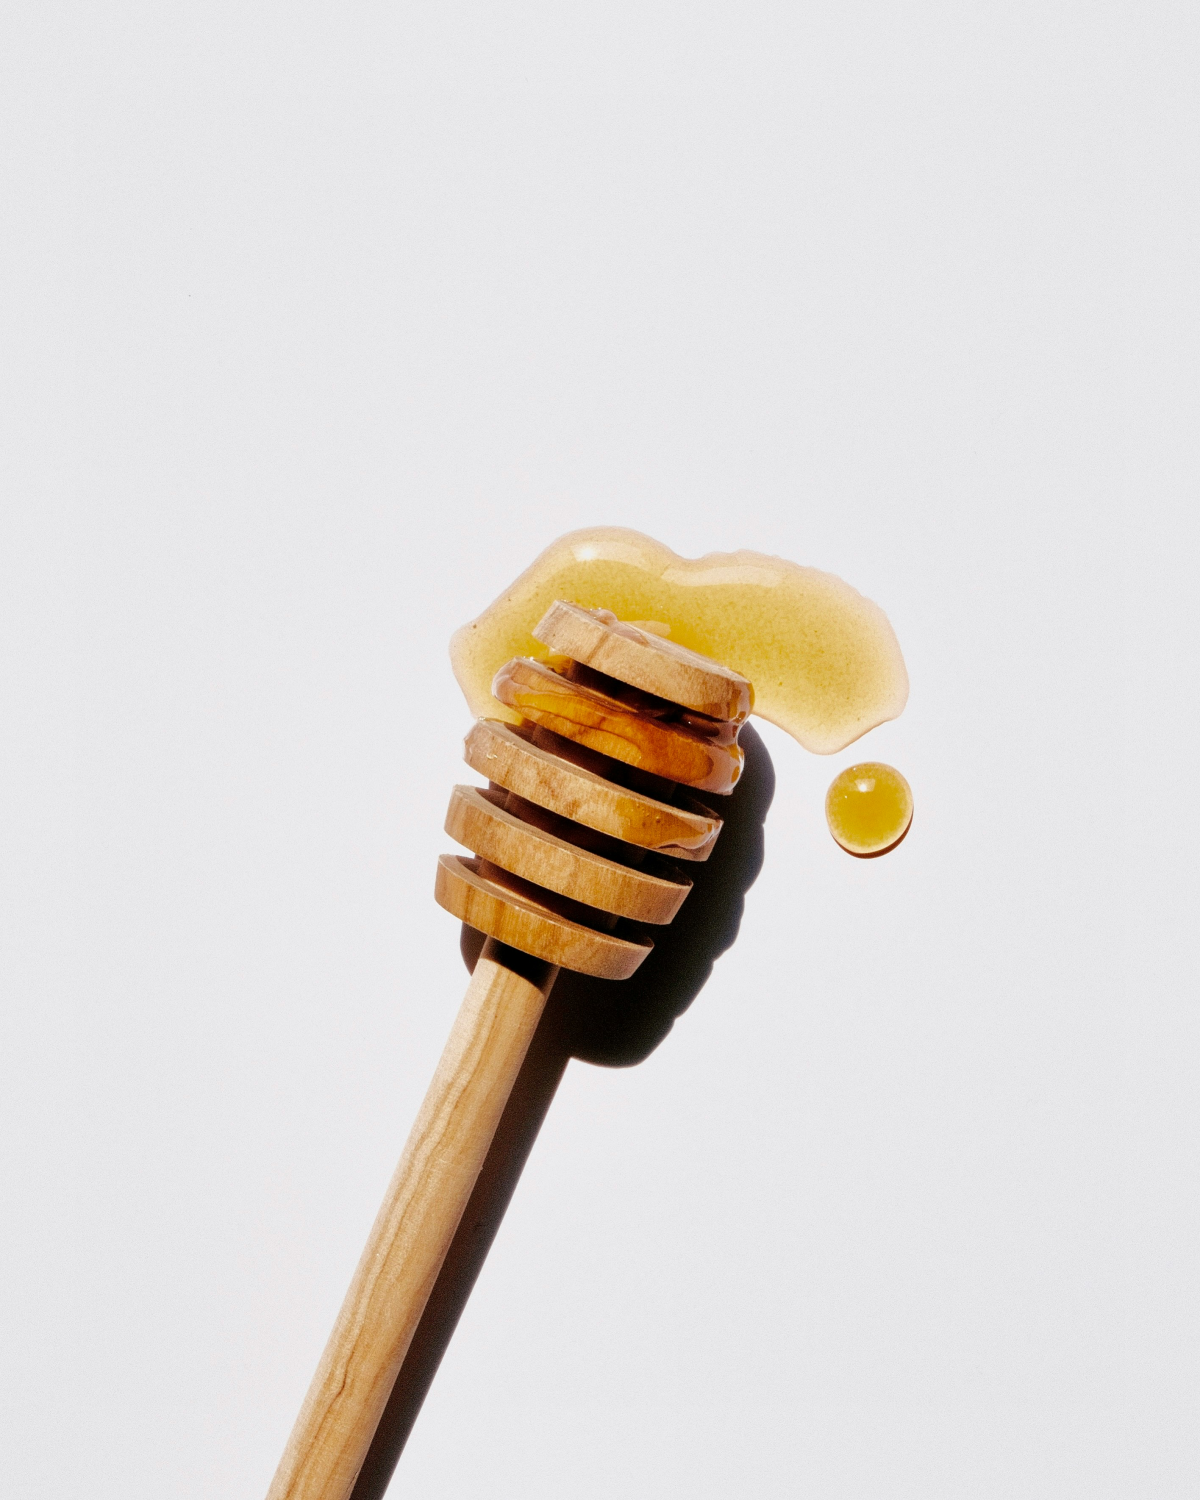 wasp trap honey on a wooden spoon